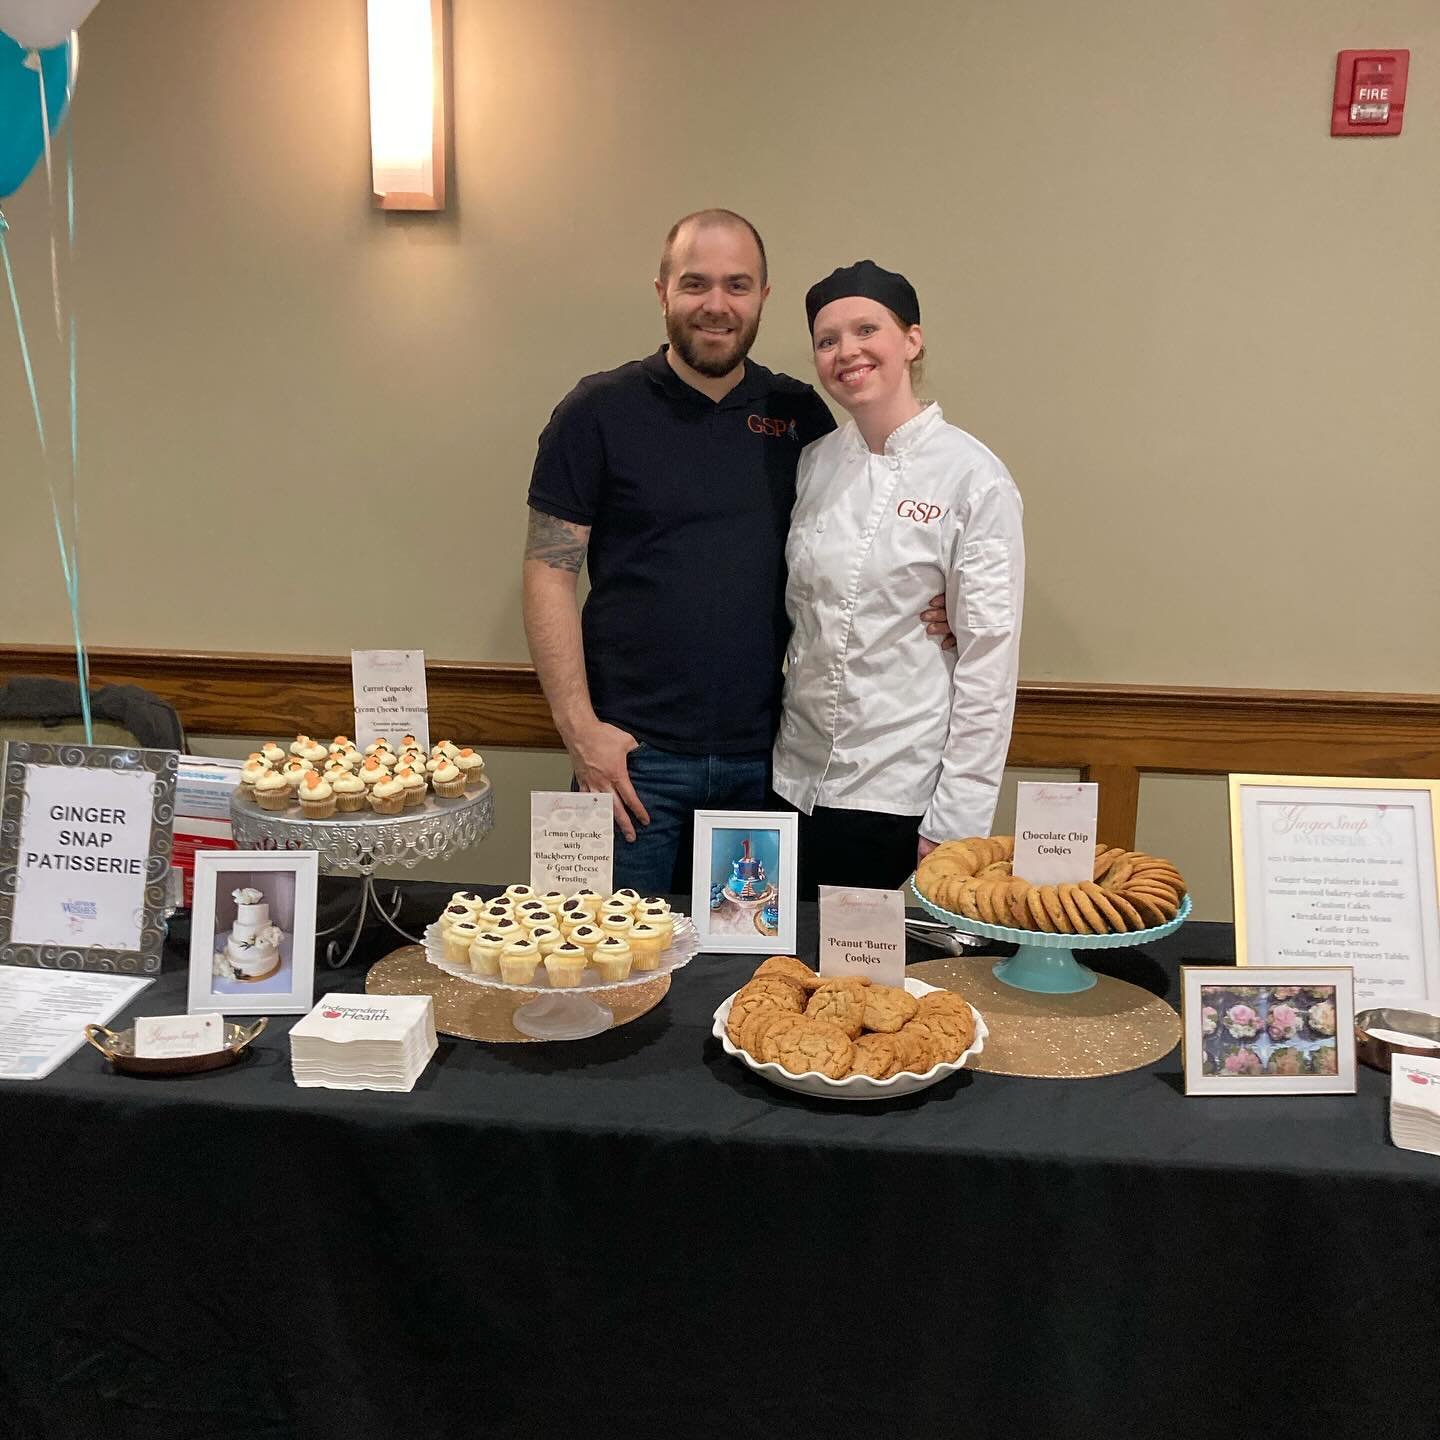 ⭐️ What an incredible event last night! Sips, Suds, &amp; Sweets to benefit @seniorwishes was a great success! ⭐️ Thank you to our own @mwach1  for inviting us to be a part of it. We had so much fun spending time with our friends from @the_deli_ea , 